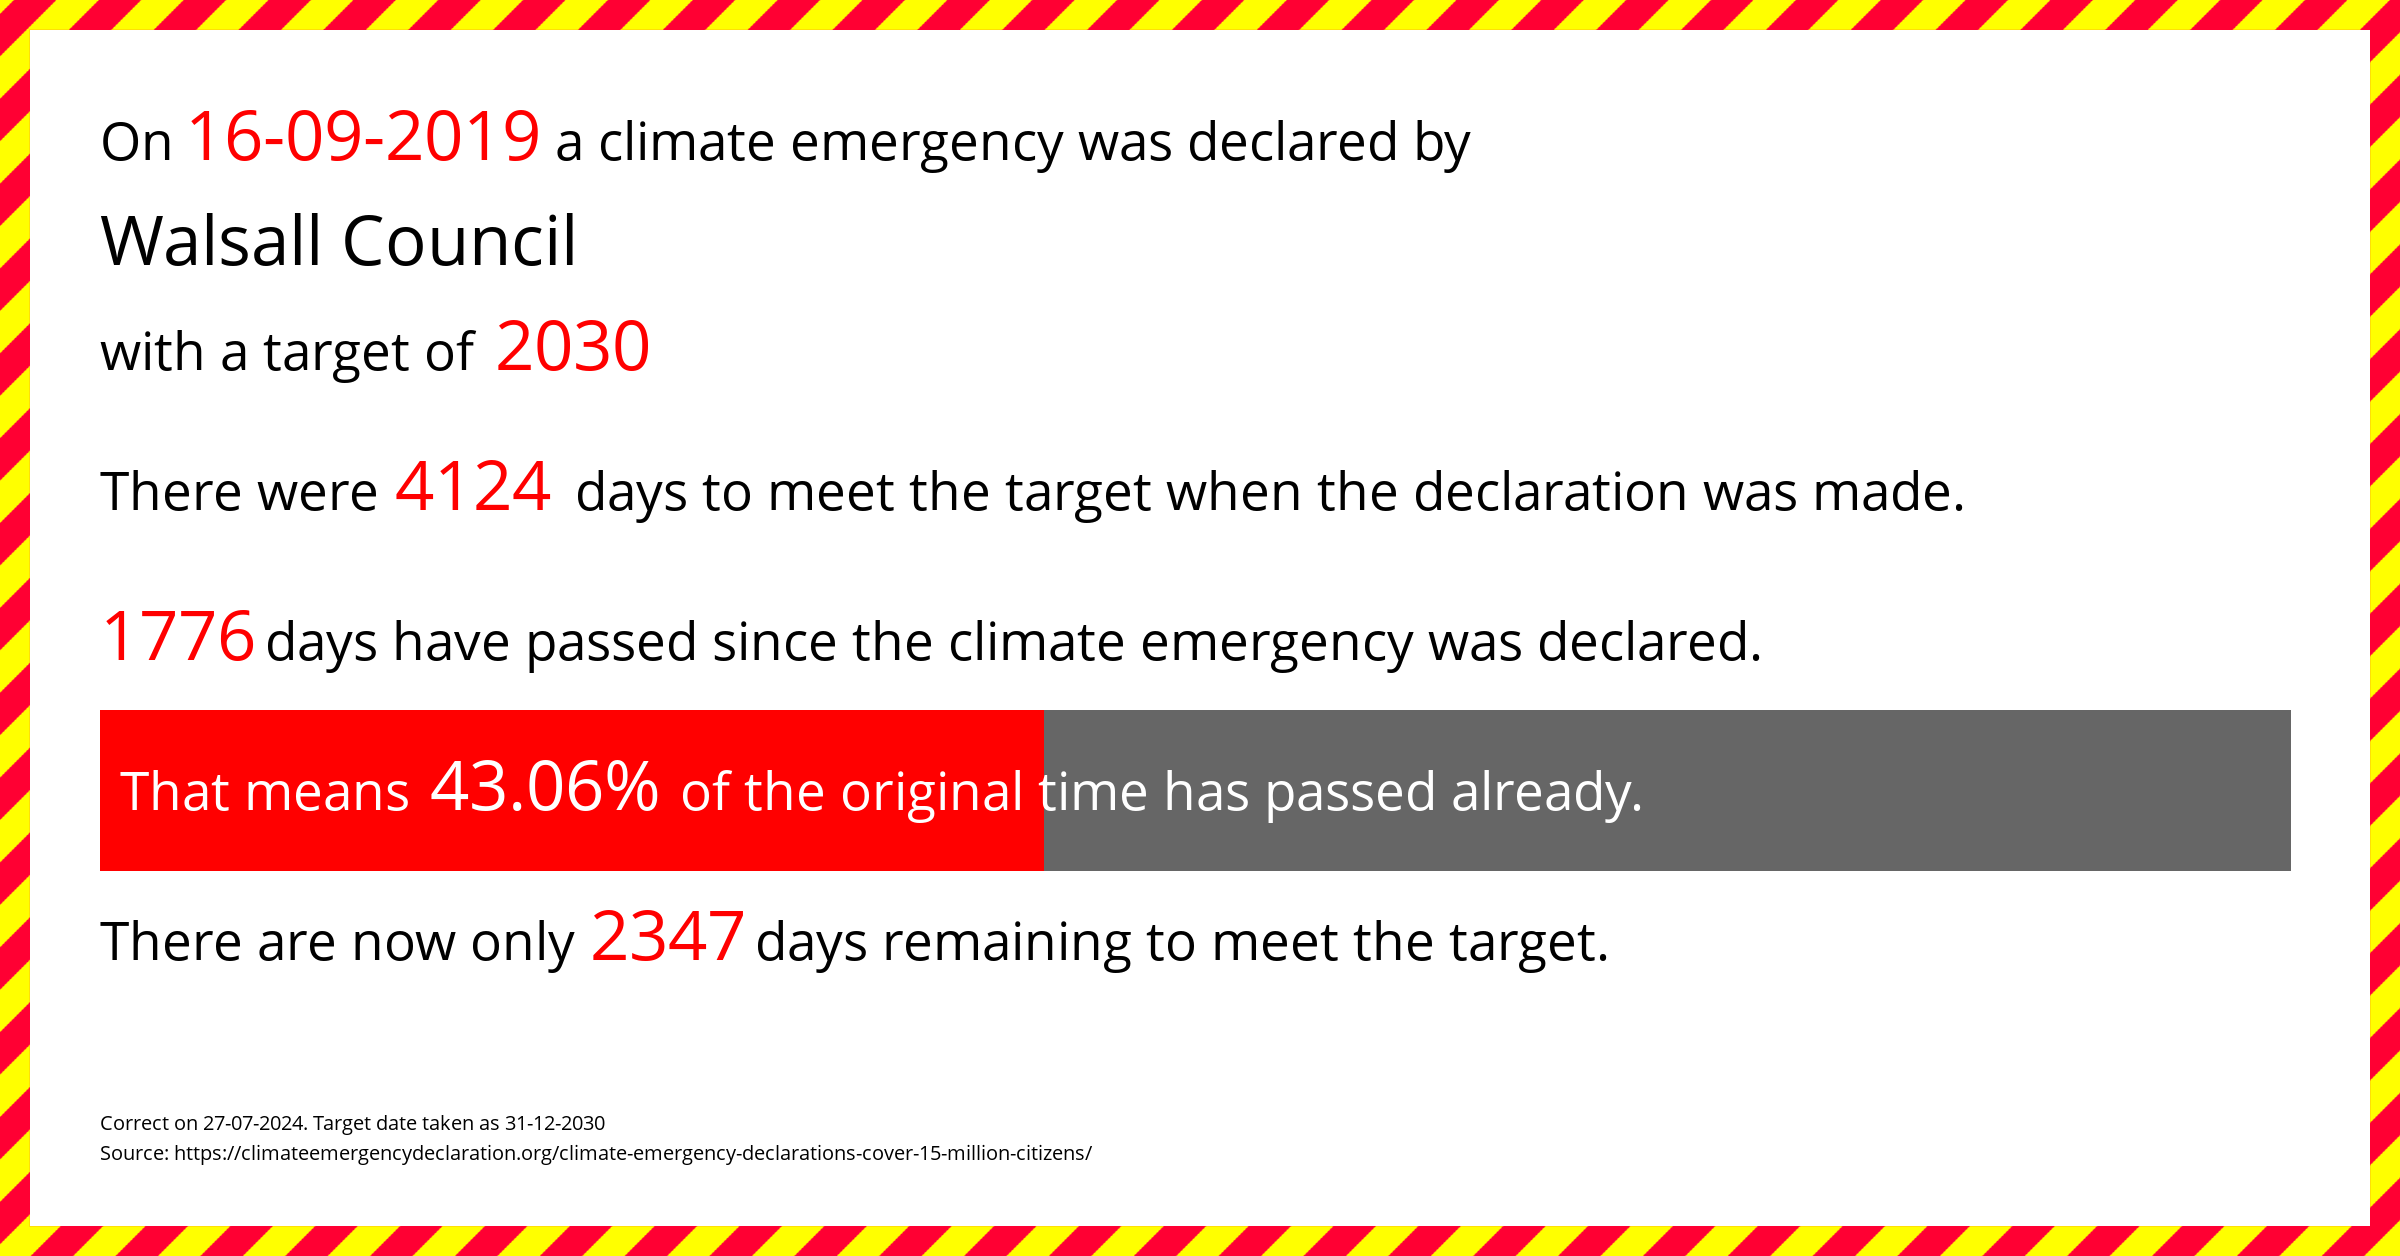 Walsall Council declared a Climate emergency on Monday 16th September 2019, with a target of 2030.